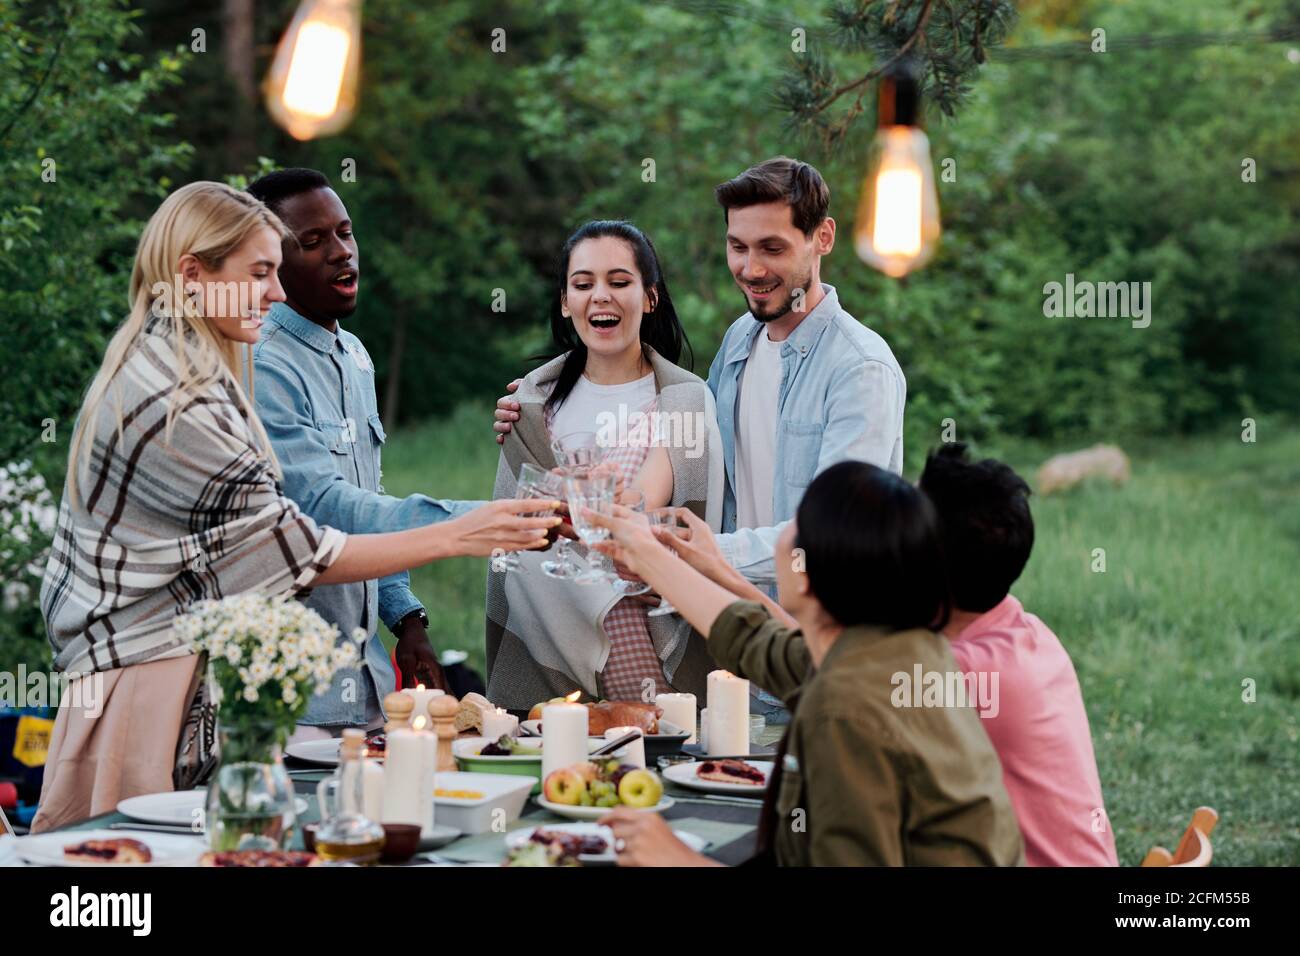 Three happy young restful couples sitting by served table in natural environment Stock Photo